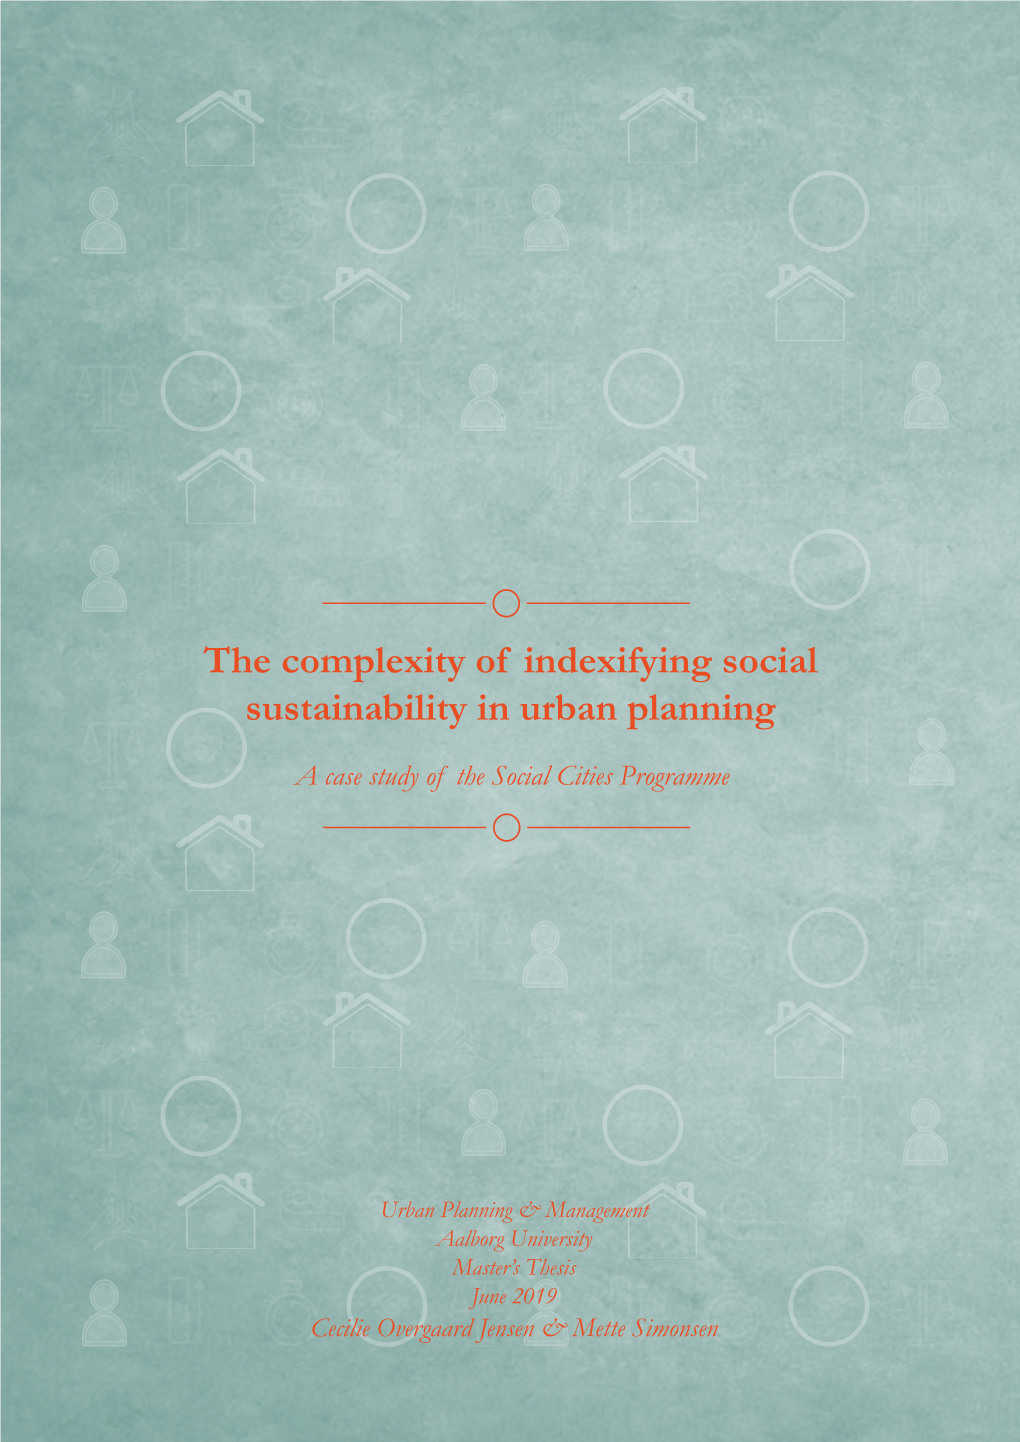 The Complexity of Indexifying Social Sustainability in Urban Planning